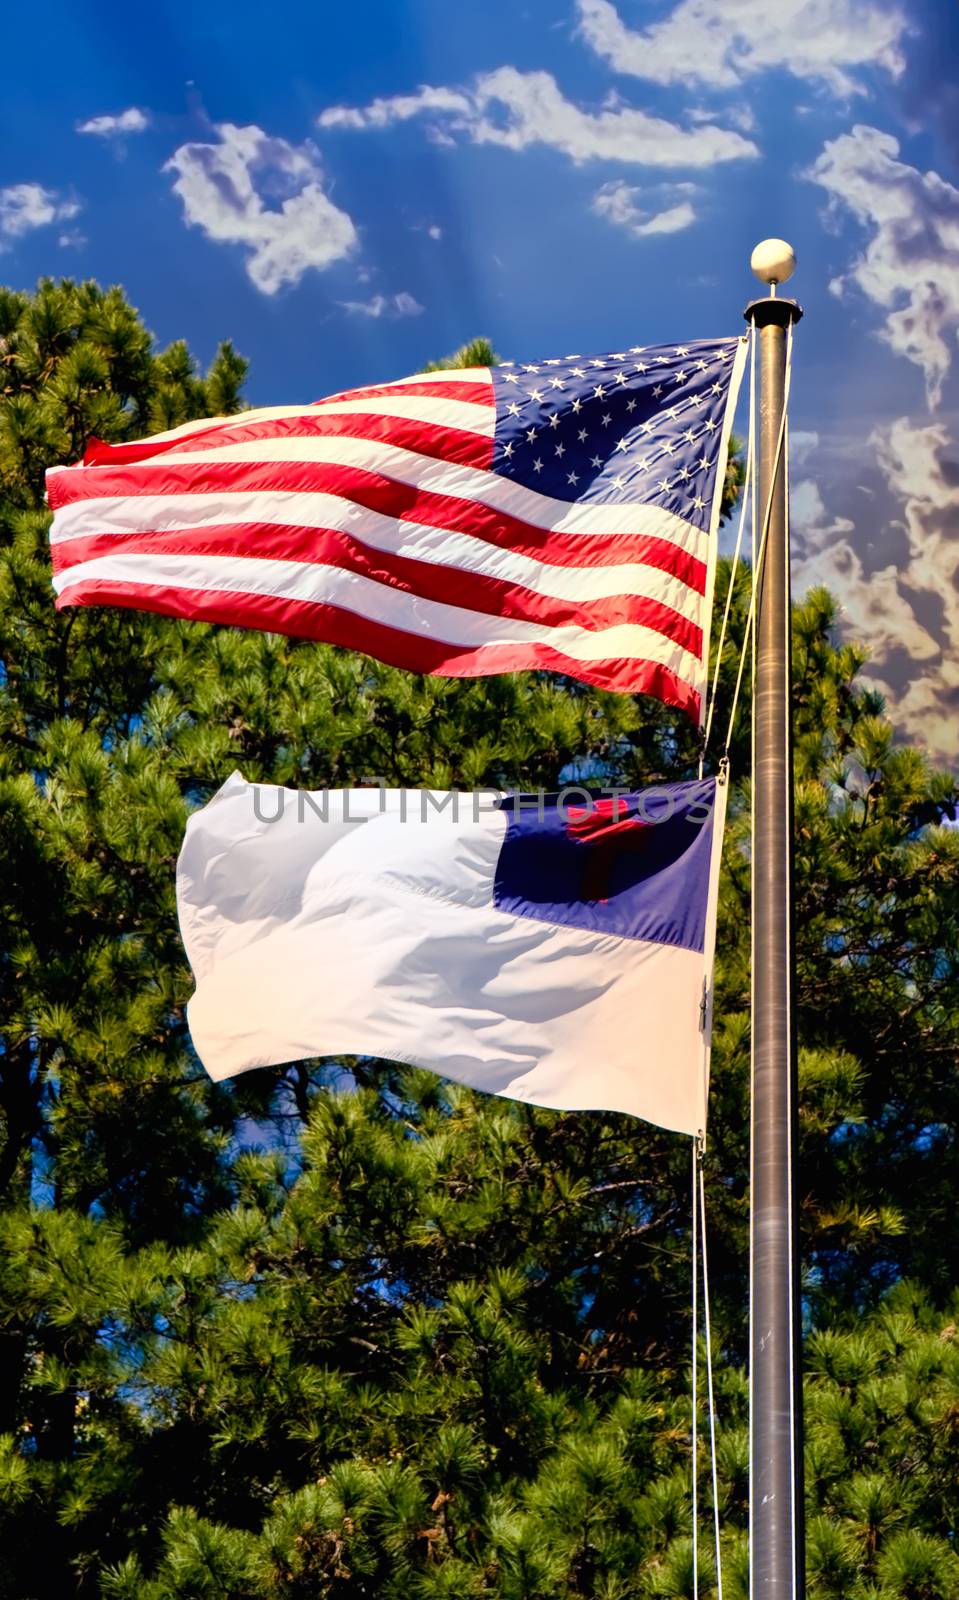 The Christian and American flags flying together against a background of trees and blue sky